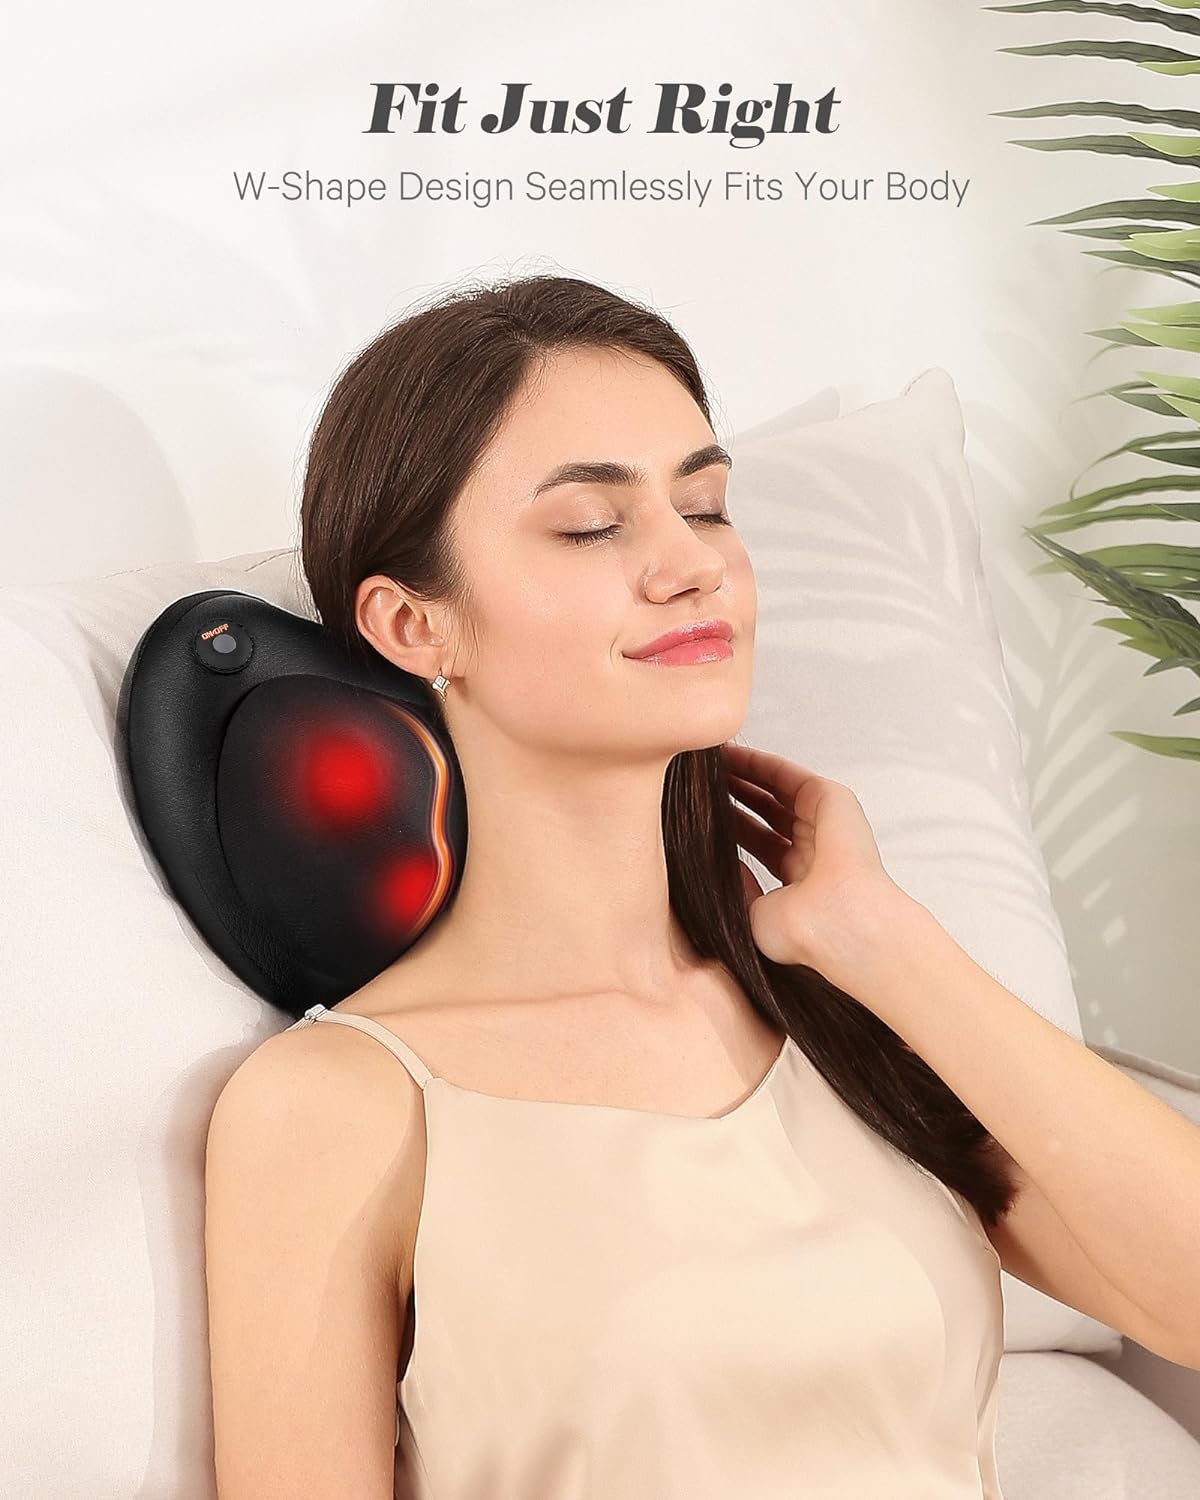 Naipo Shiatsu Neck Back Massager with Heat, Electric Massager Deep Tissue Kneading Massage to Relief Shoulder Muscles, Gift for Mom/Dad/Women/Men in Home Office and Car - image 5 of 12